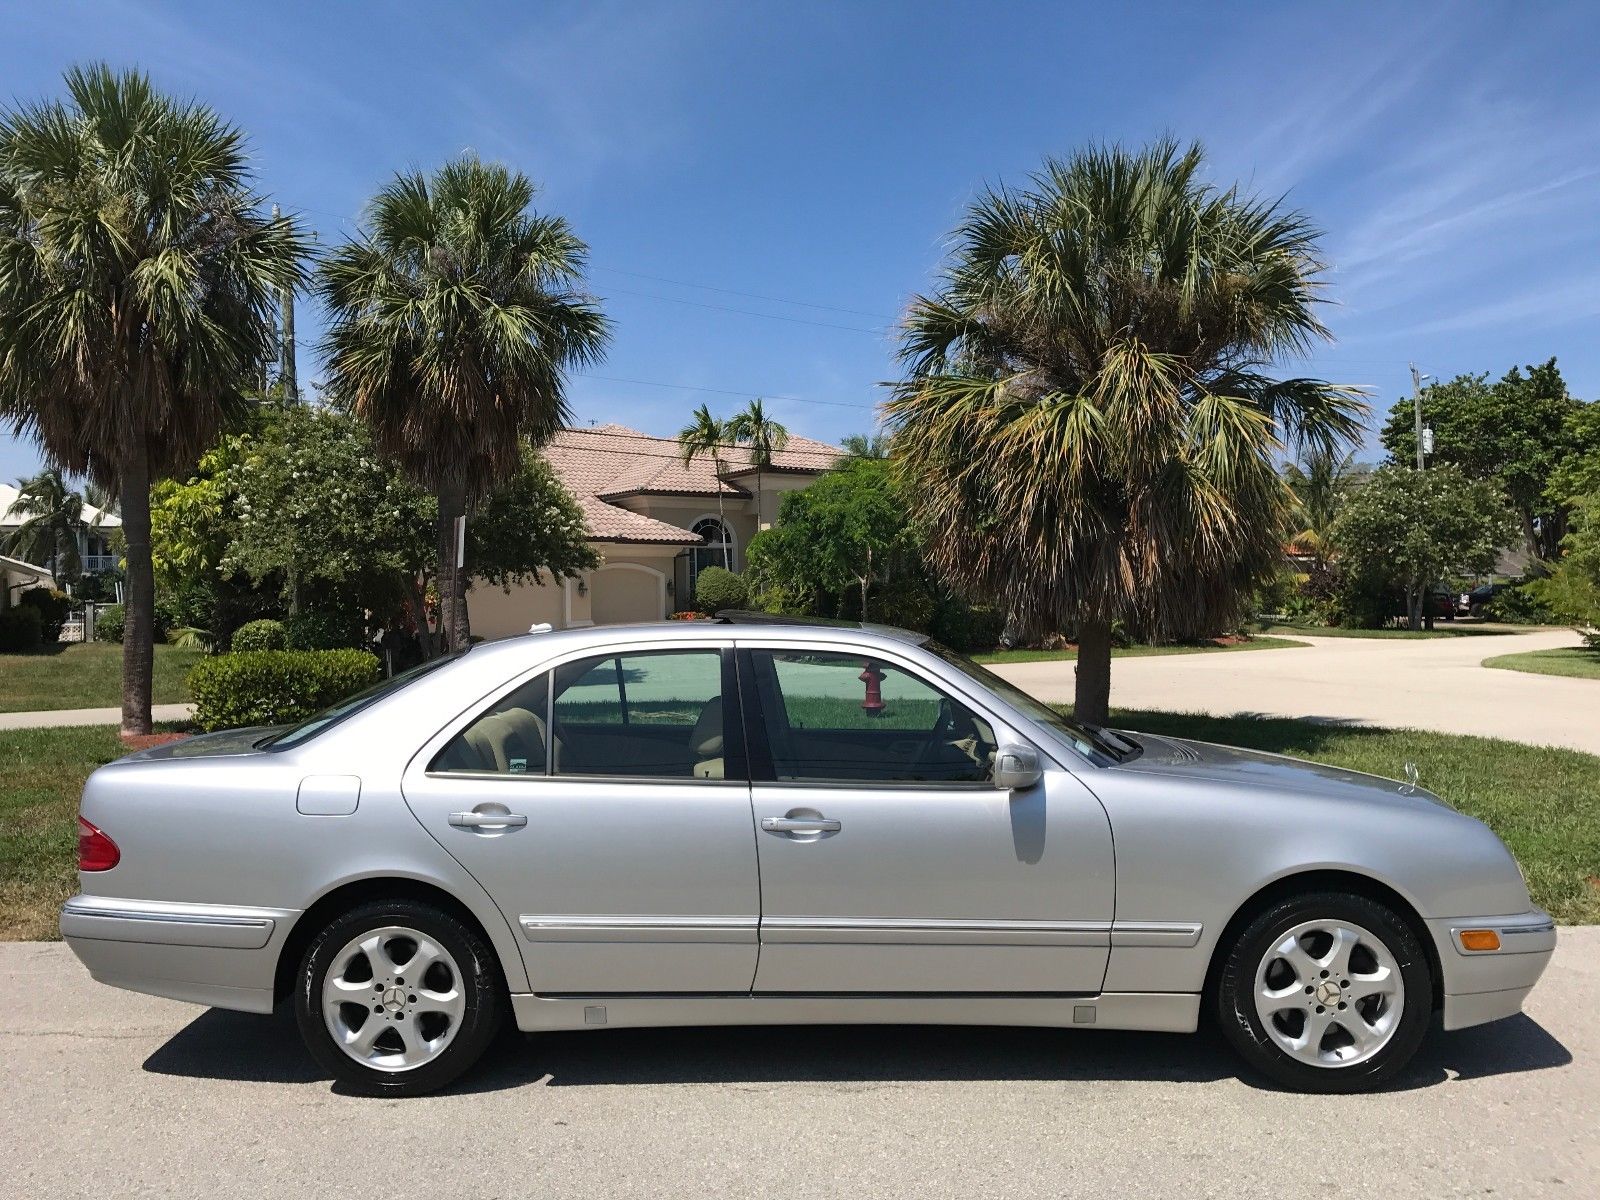 Used 2002 Mercedes Benz E Class E320 Sport Wheels 30 Service Records Fl Car 2002 Mercedes Benz E320 Brown Piping Sunroof 2 Keyfobs Not E350 E500 2017 2018 Is In Stock And For Sale 24carshop Com